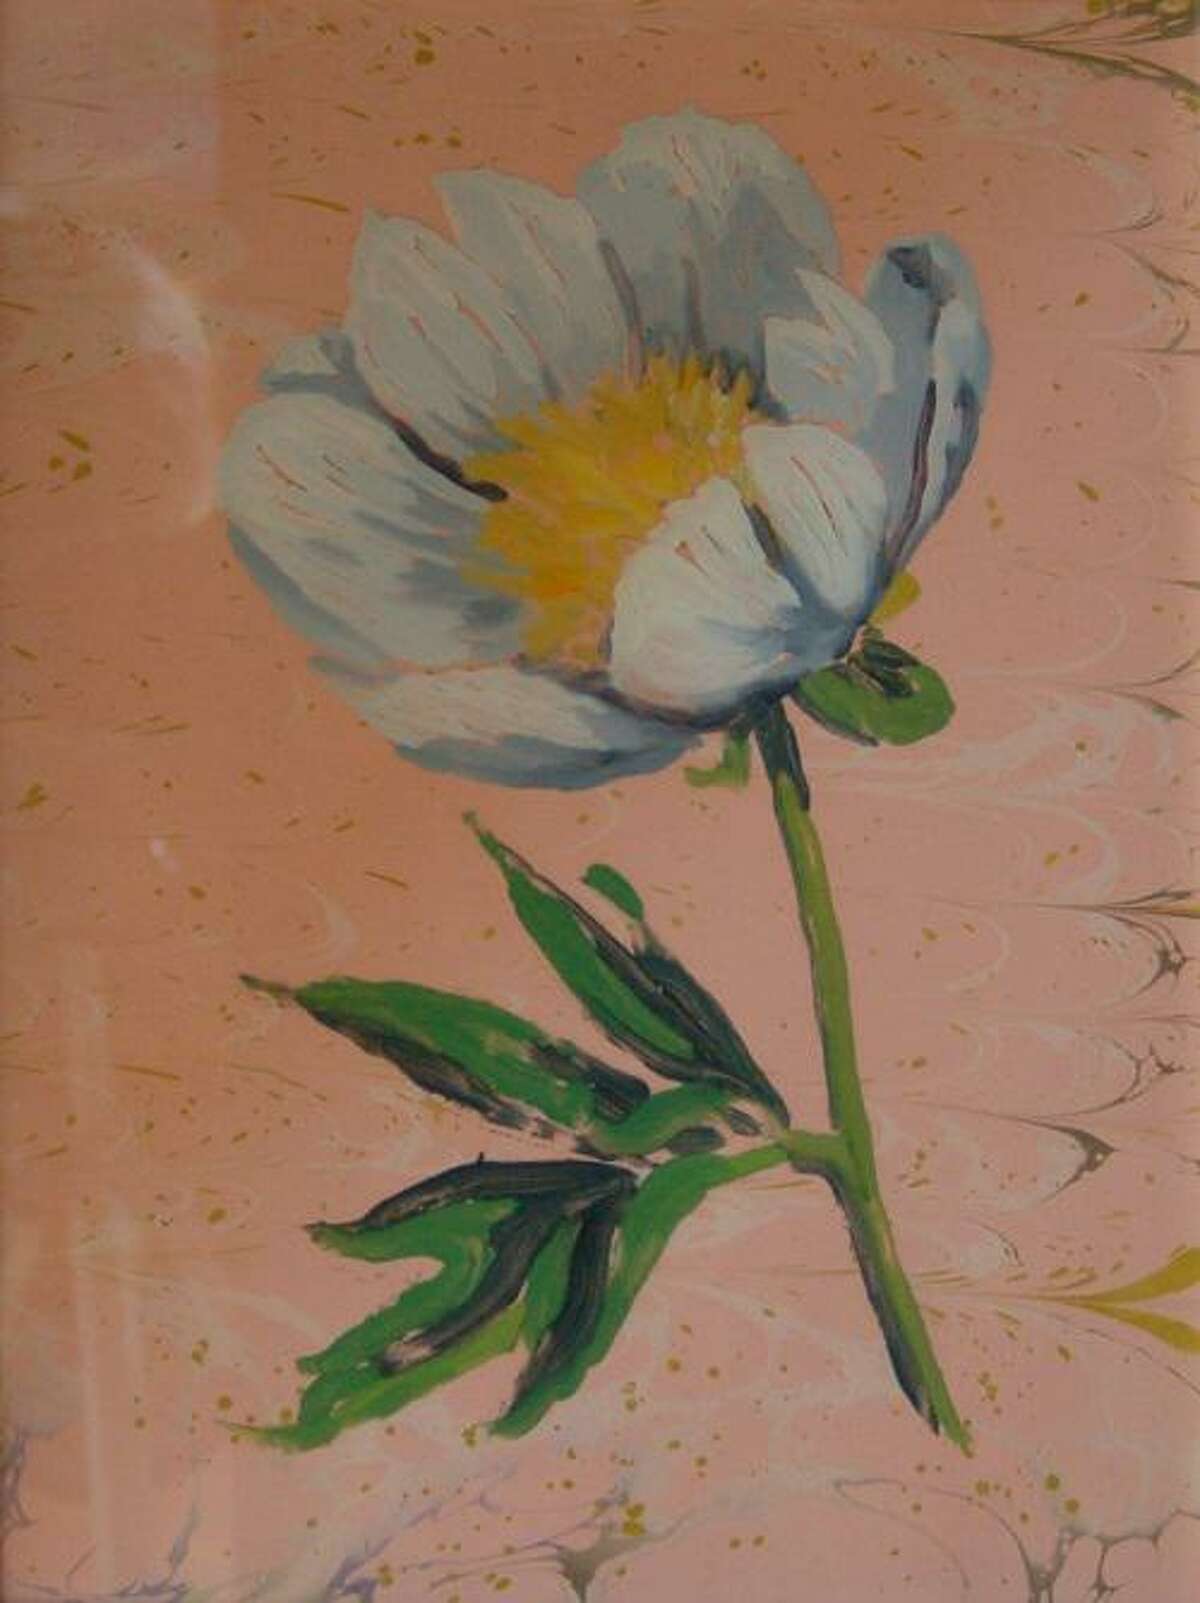 The David M. Hunt Library will have its annual Holiday Pop-Up Shop featuring crafts, ornaments, and food from local artisans and small businesses, starting Thanksgiving week and running through the New Year.  Pictured, ”Marbled Peony” by Lilly Woodworth.